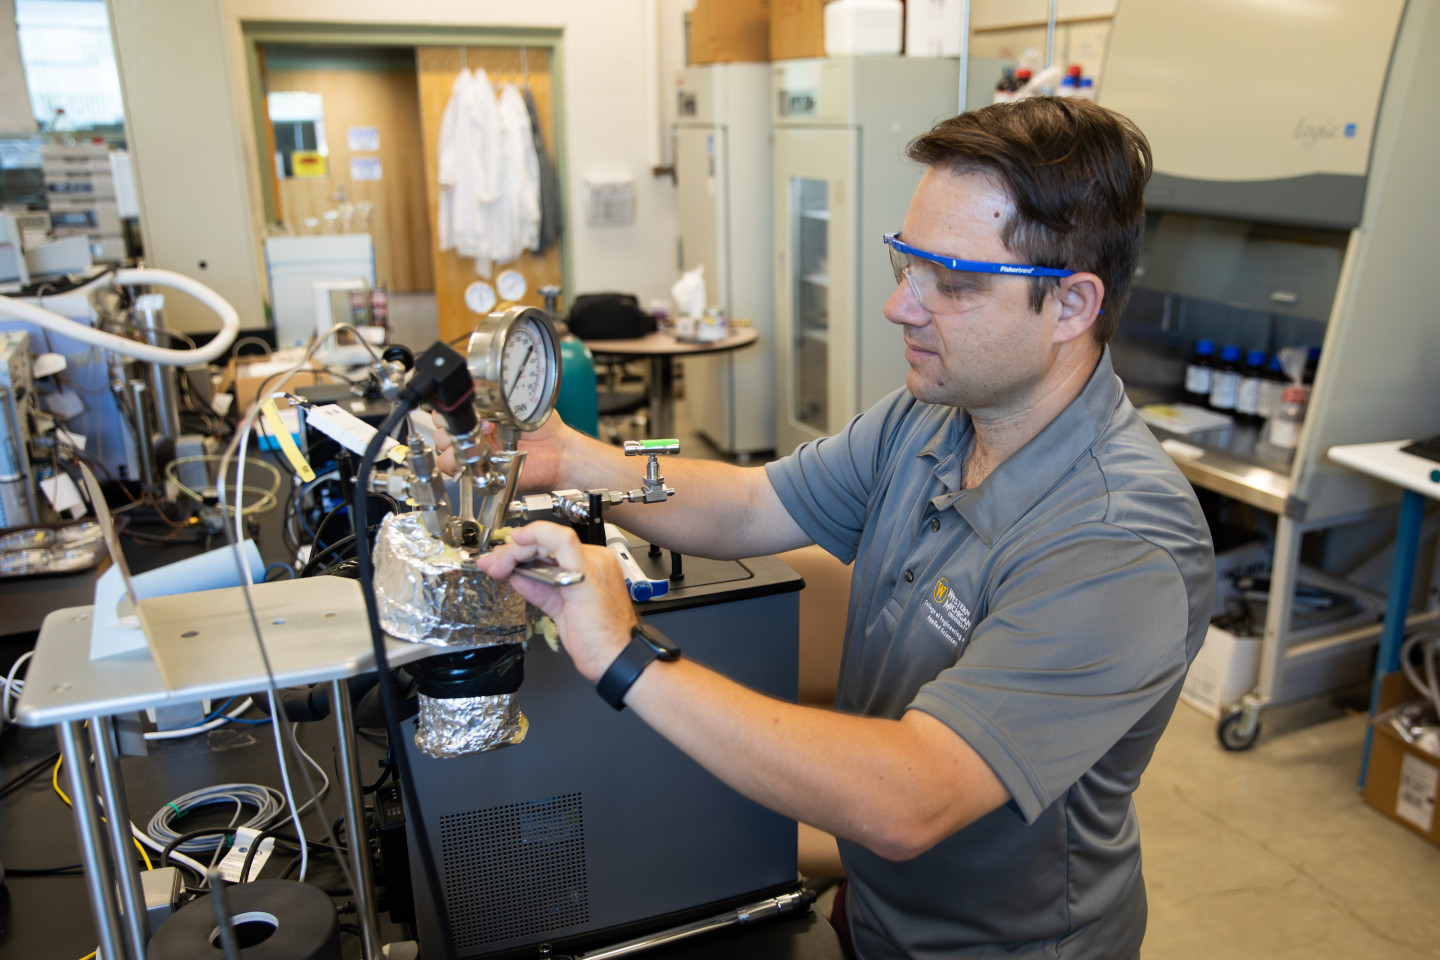 Mert Atilhan works with scientific equipment in his lab.